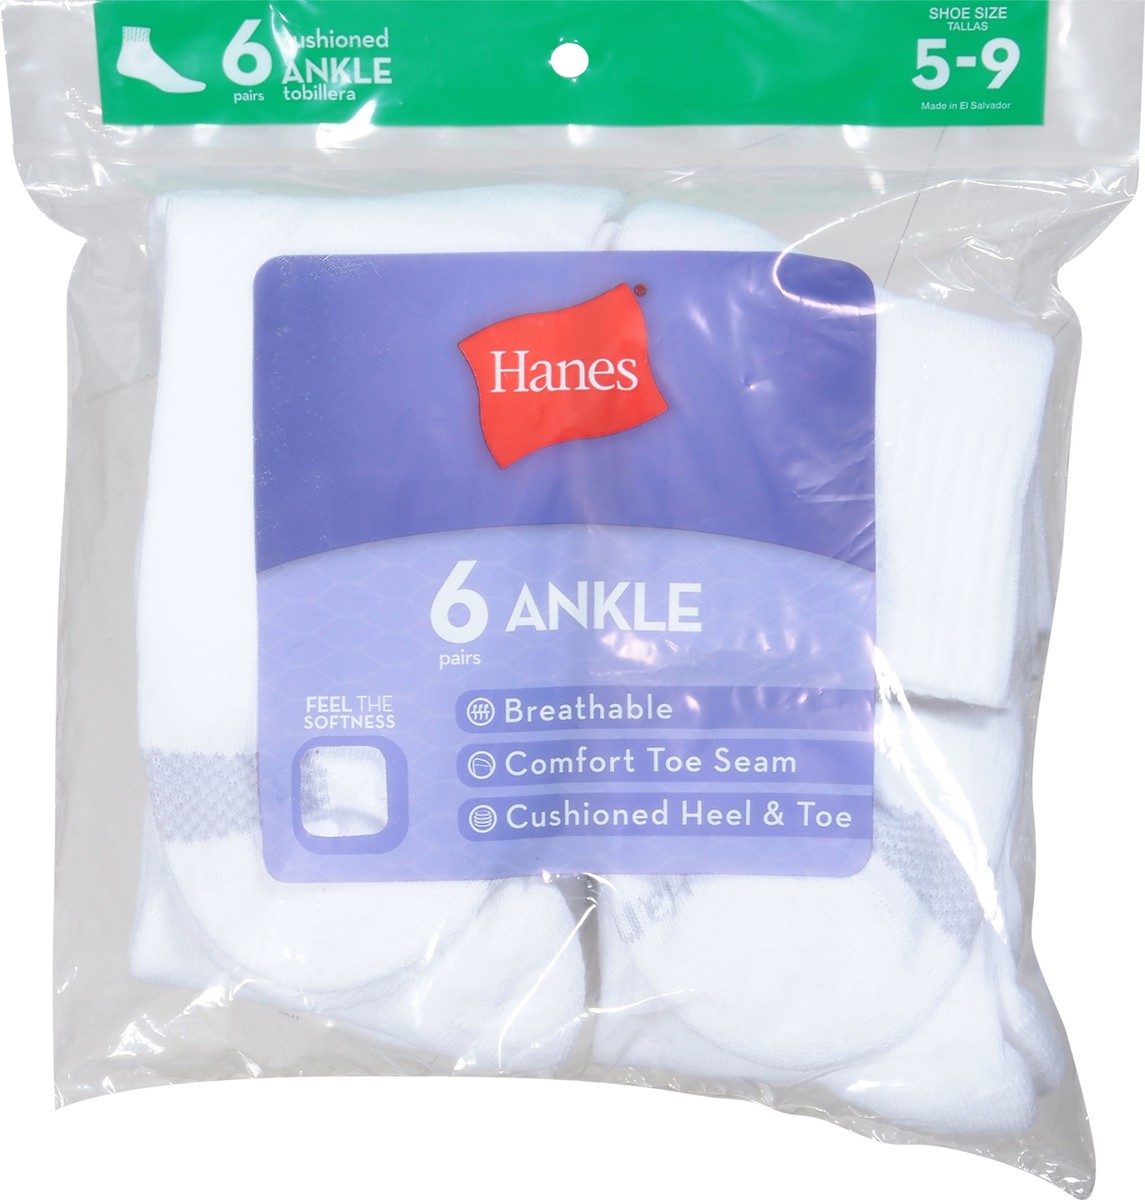 slide 6 of 9, Hanes Shoe Size 5-9 Cushioned Ankle Socks 6 Pairs, 1 ct